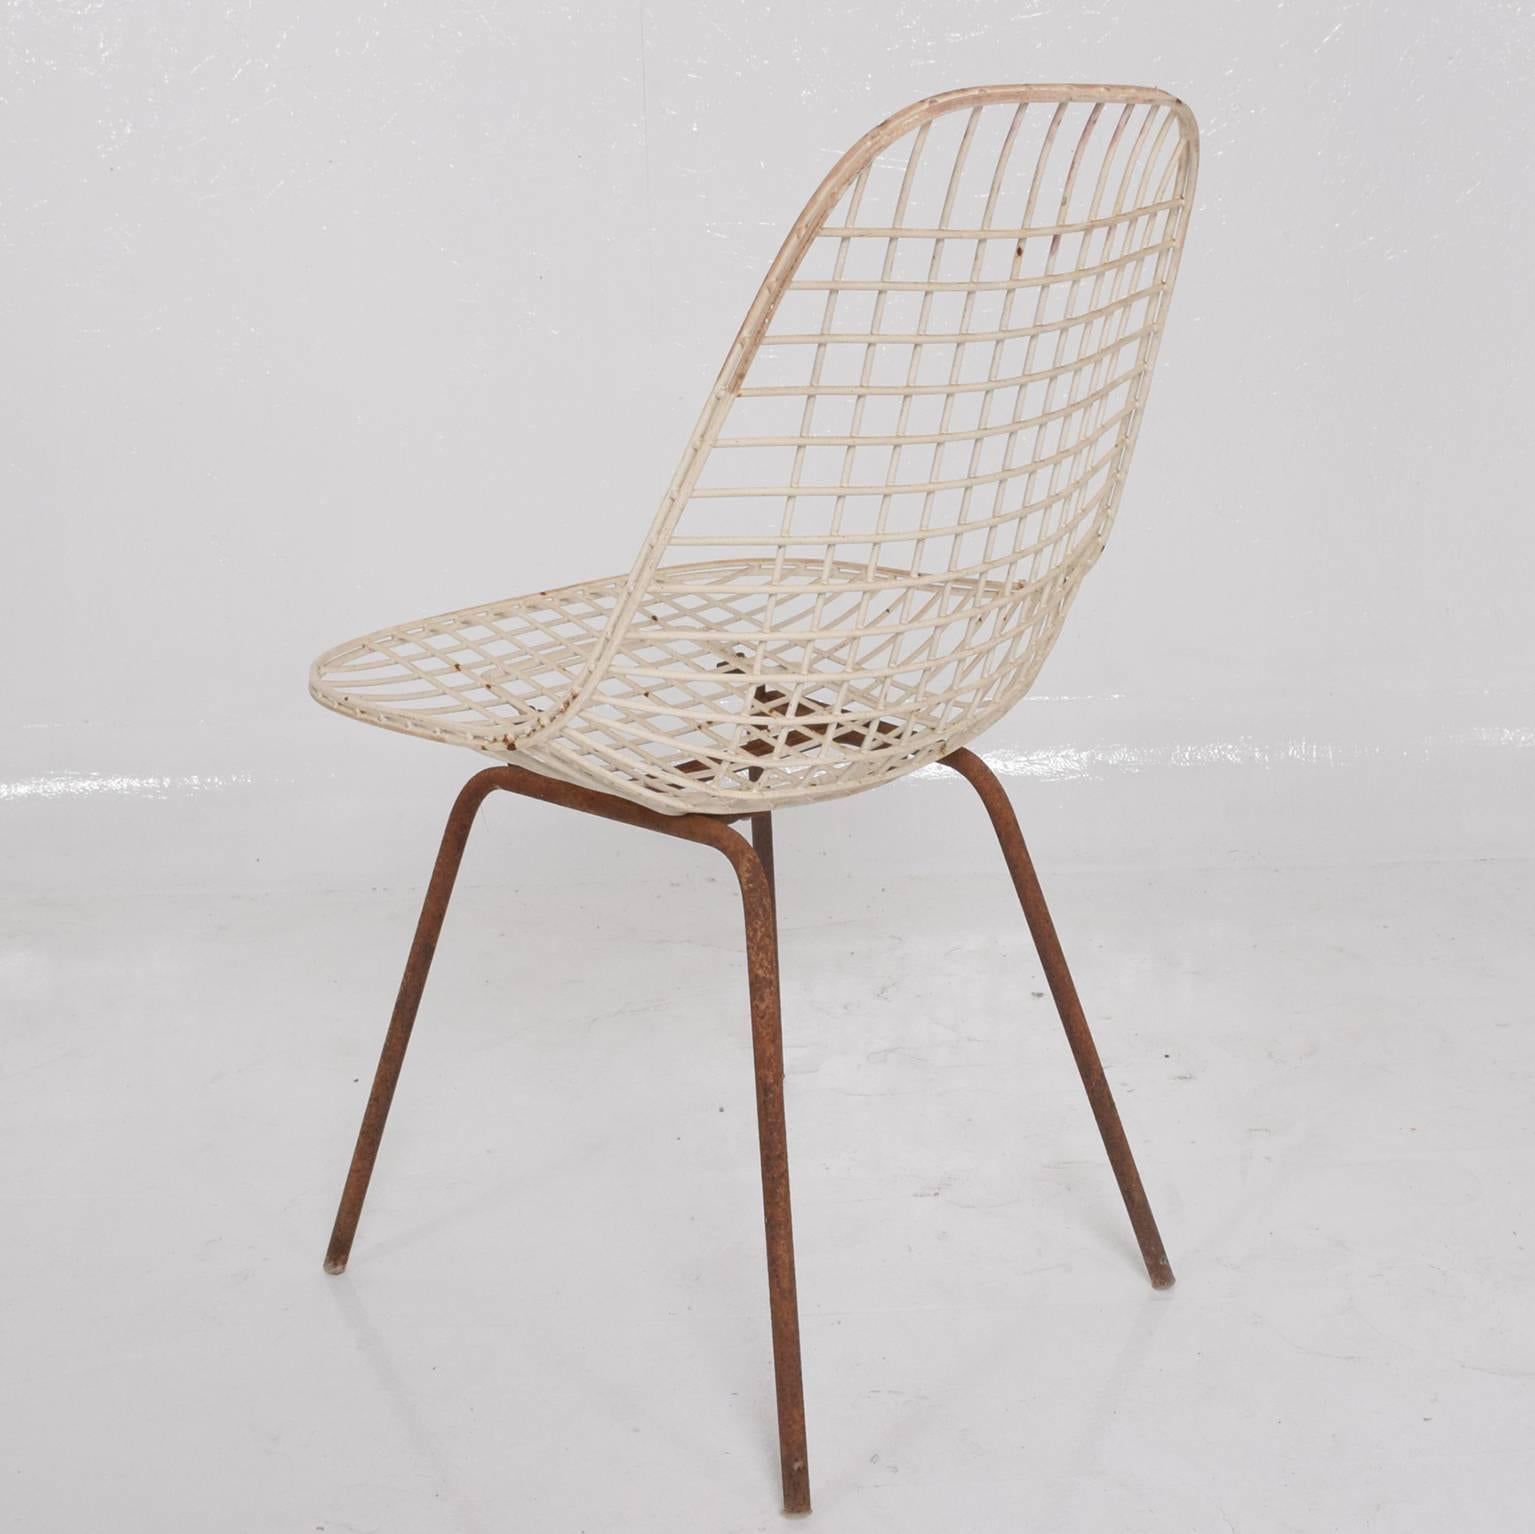 American Set of Three Wire Chair DKX 5 by Ray & Charles Eames Designed in 1951